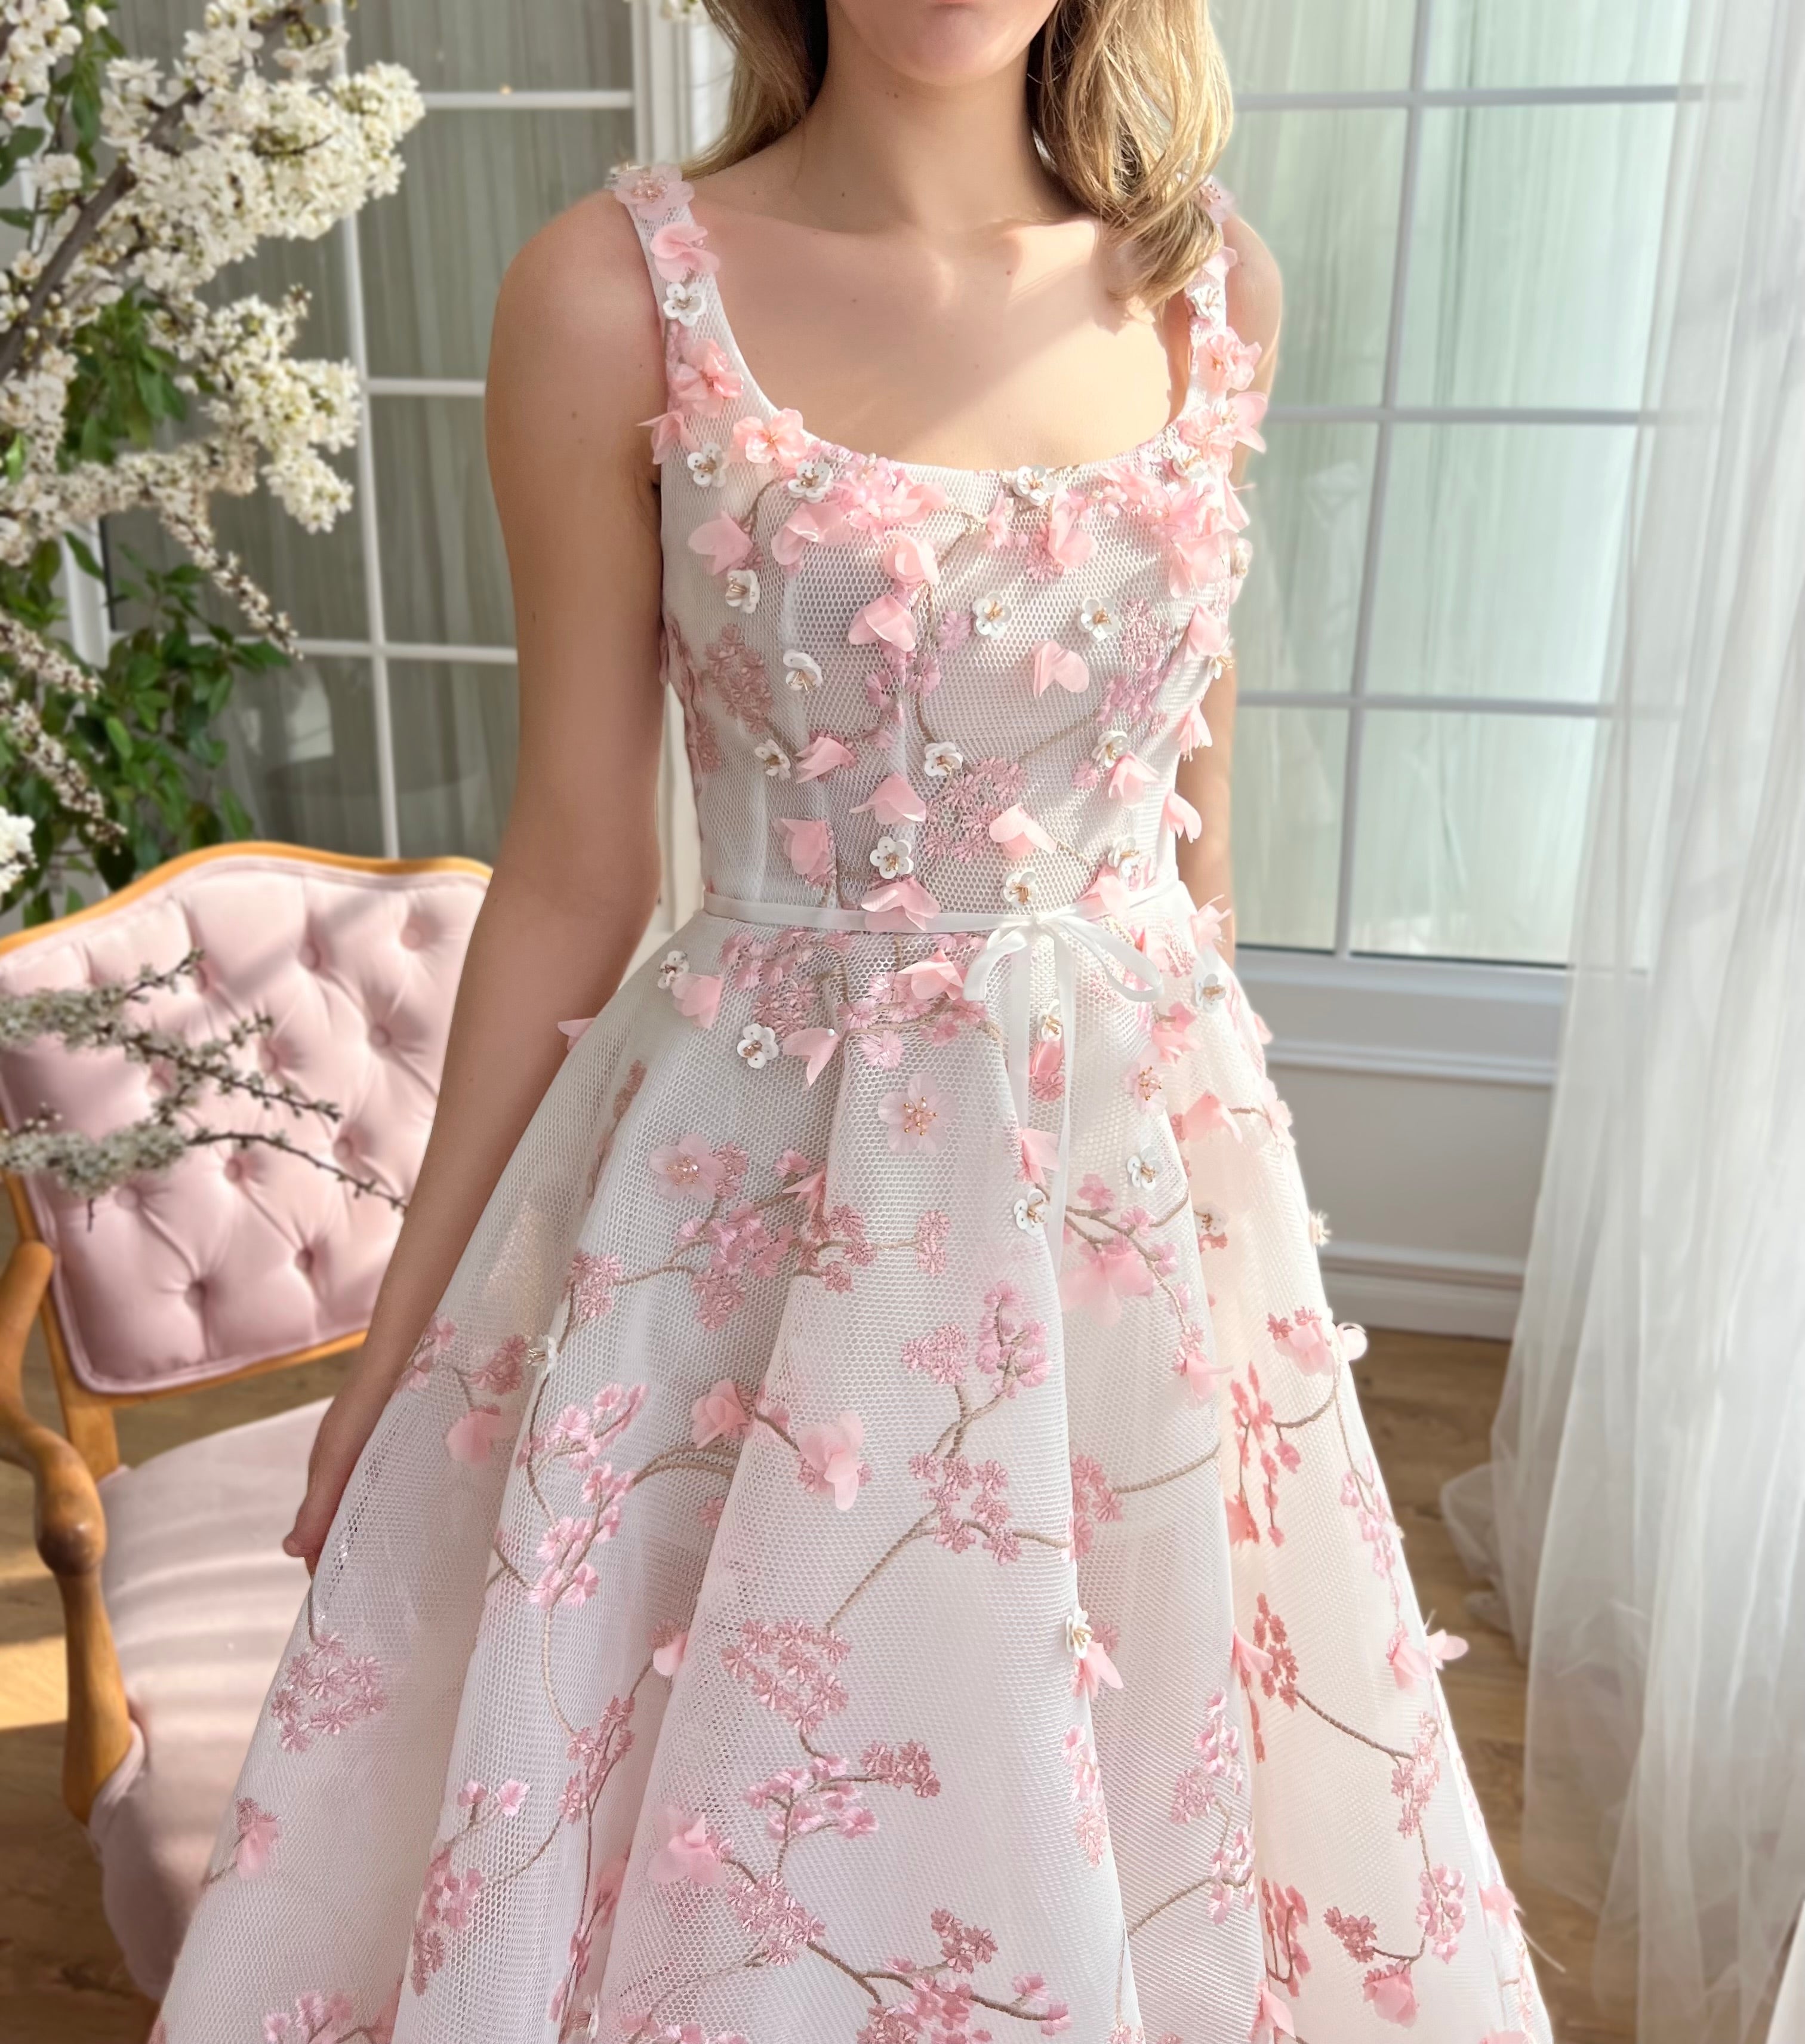 Pink midi dress with embroidered cherry blossoms and straps